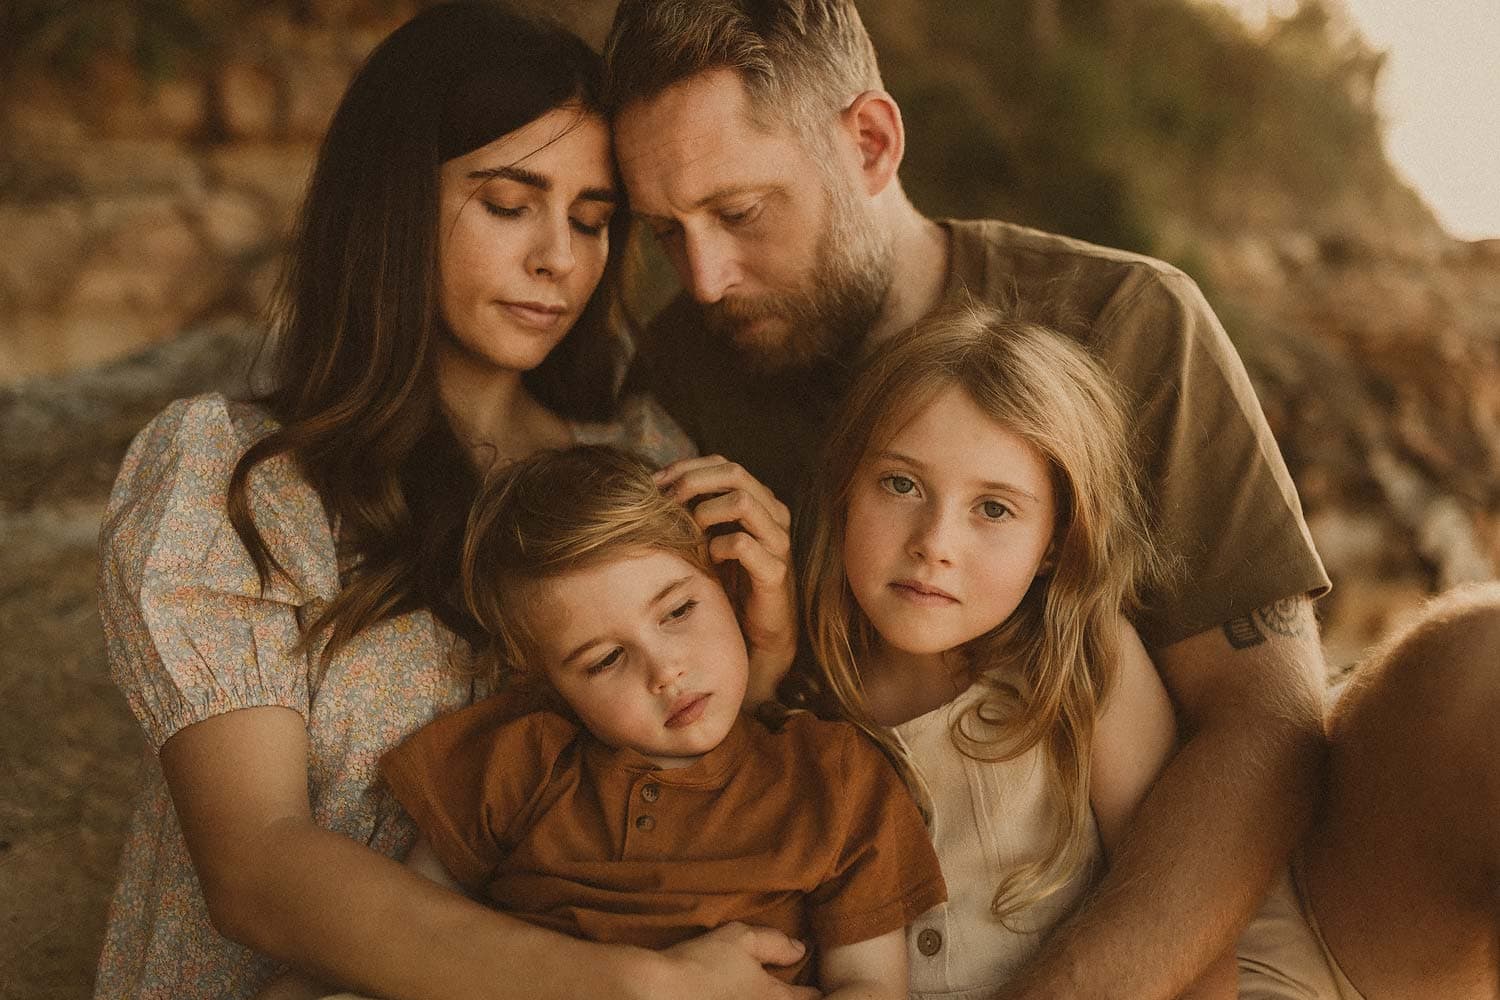 Family-photography-sydney-family-embrace-in-a-tender-moment-with-mum-lovingly-stroking-hair-of-young-boy-whilst-leaning-into-dad-and-little-girl-who-looks-directly-into-camera